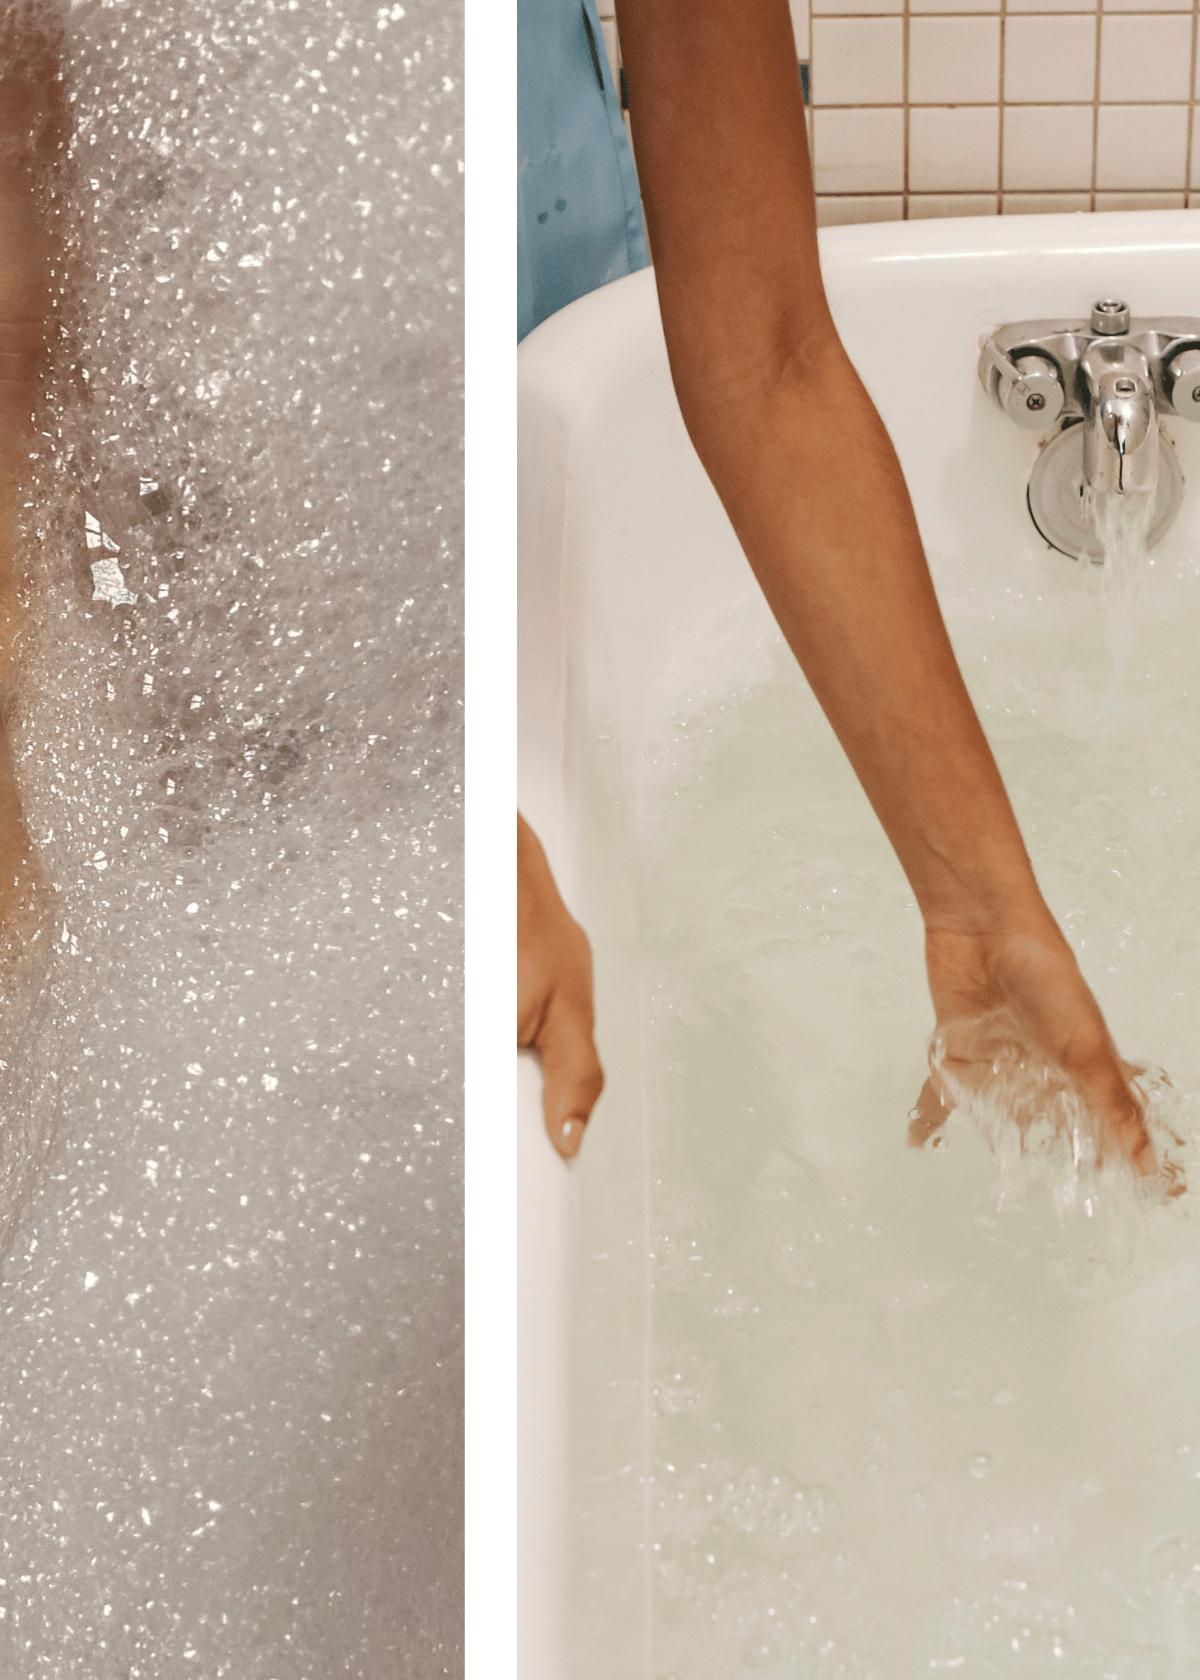 How to Use Body Wash for Maximum Scent All Day Long